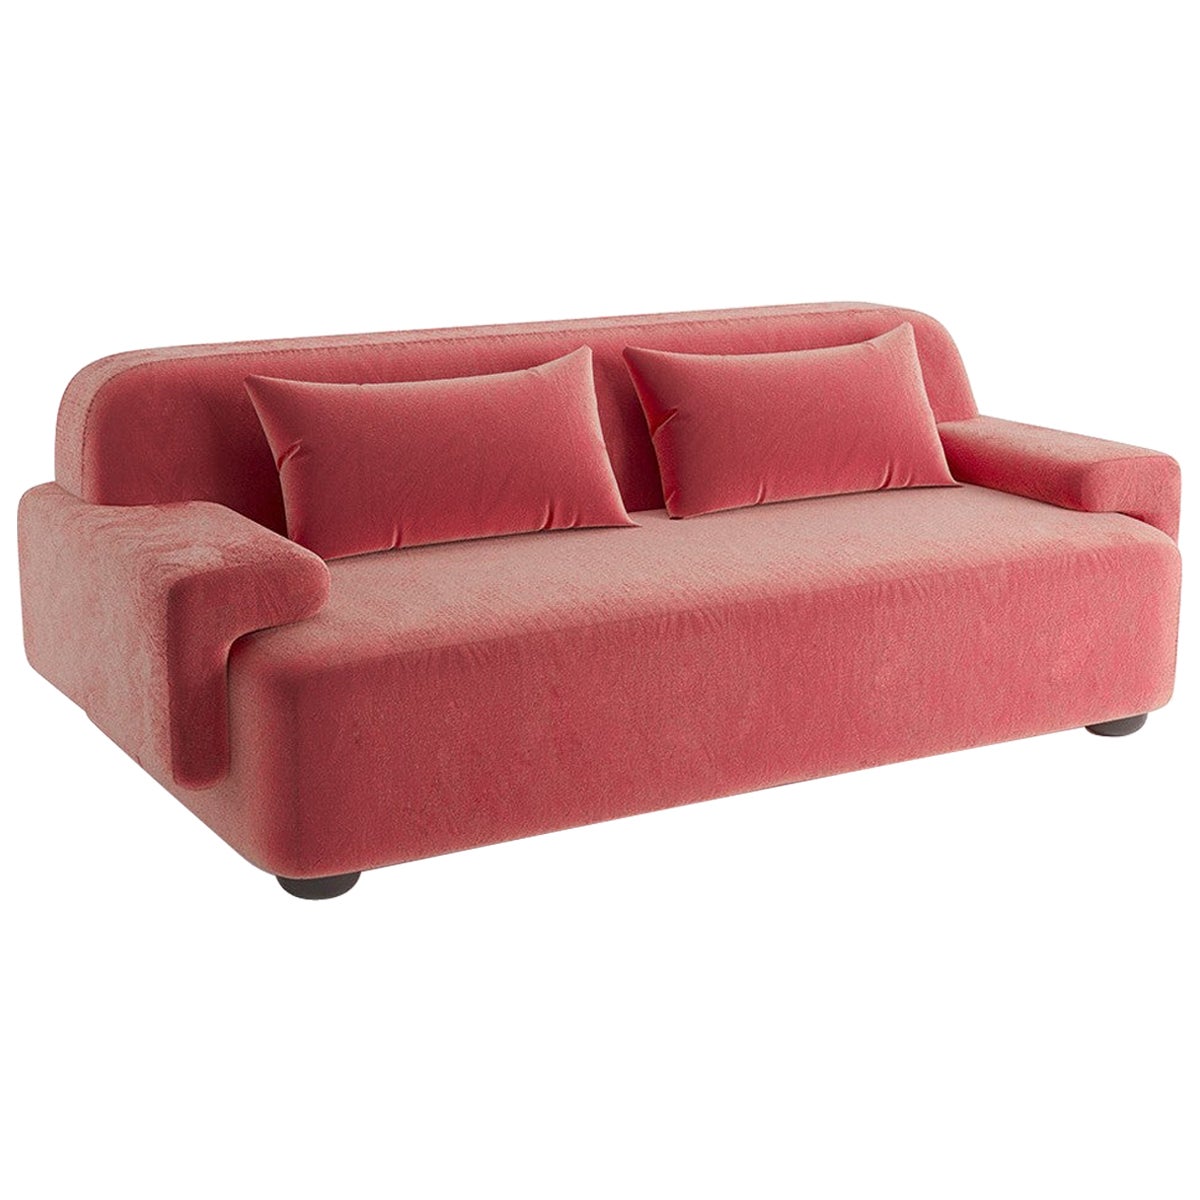 Popus Editions Lena 4 Seater Sofa in Pink Como Velvet Upholstery For Sale